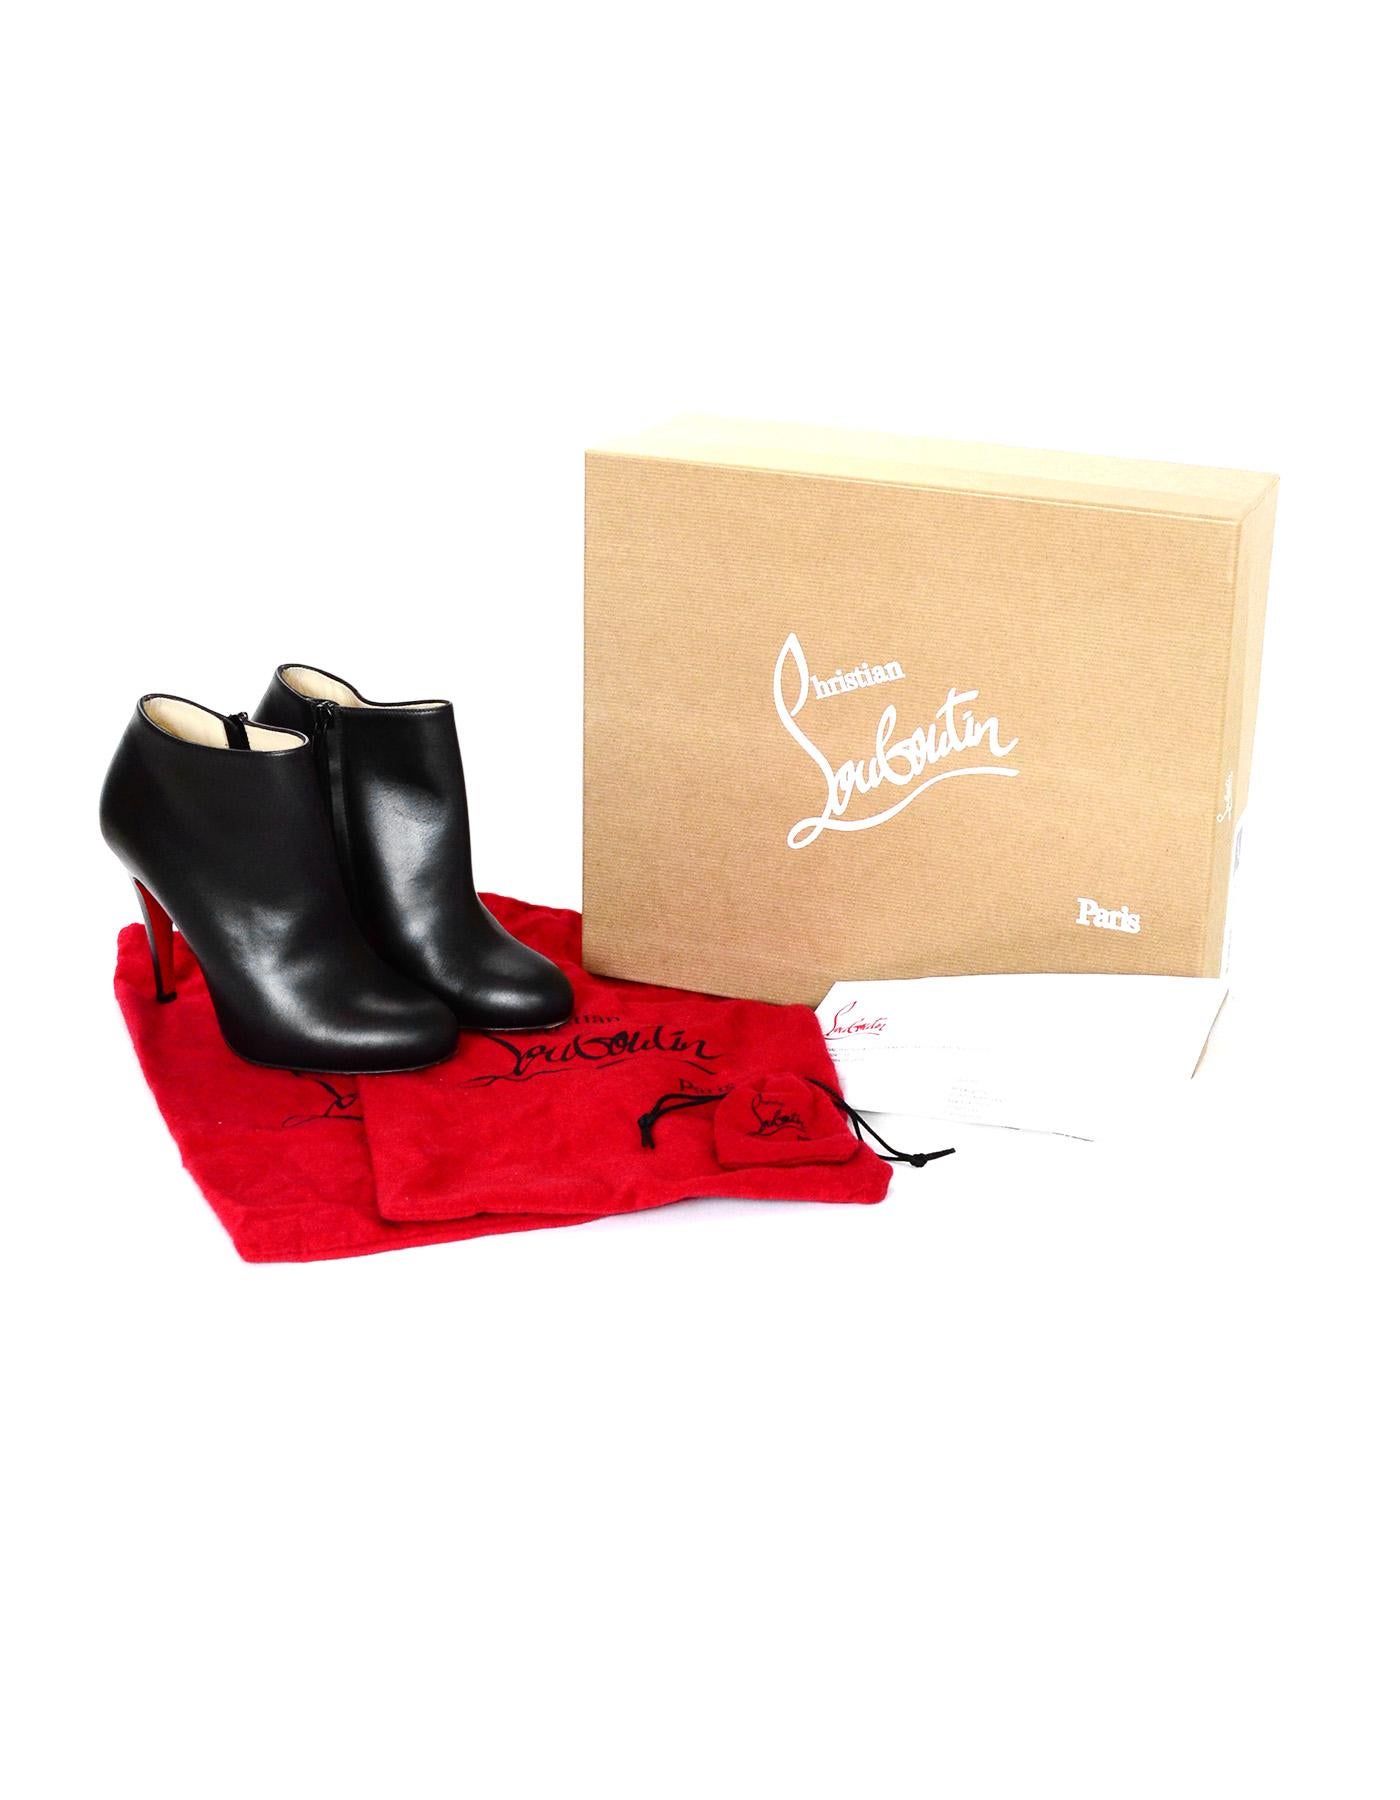 Christian Louboutin Black Leather Bellee 100 Ankle Booties Sz 36.5

Made In: Italy
Color: Black
Hardware: Black
Materials: Leather
Closure/Opening: Side zipper
Overall Condition: Excellent pre-owned condition with exception of wear on soles and